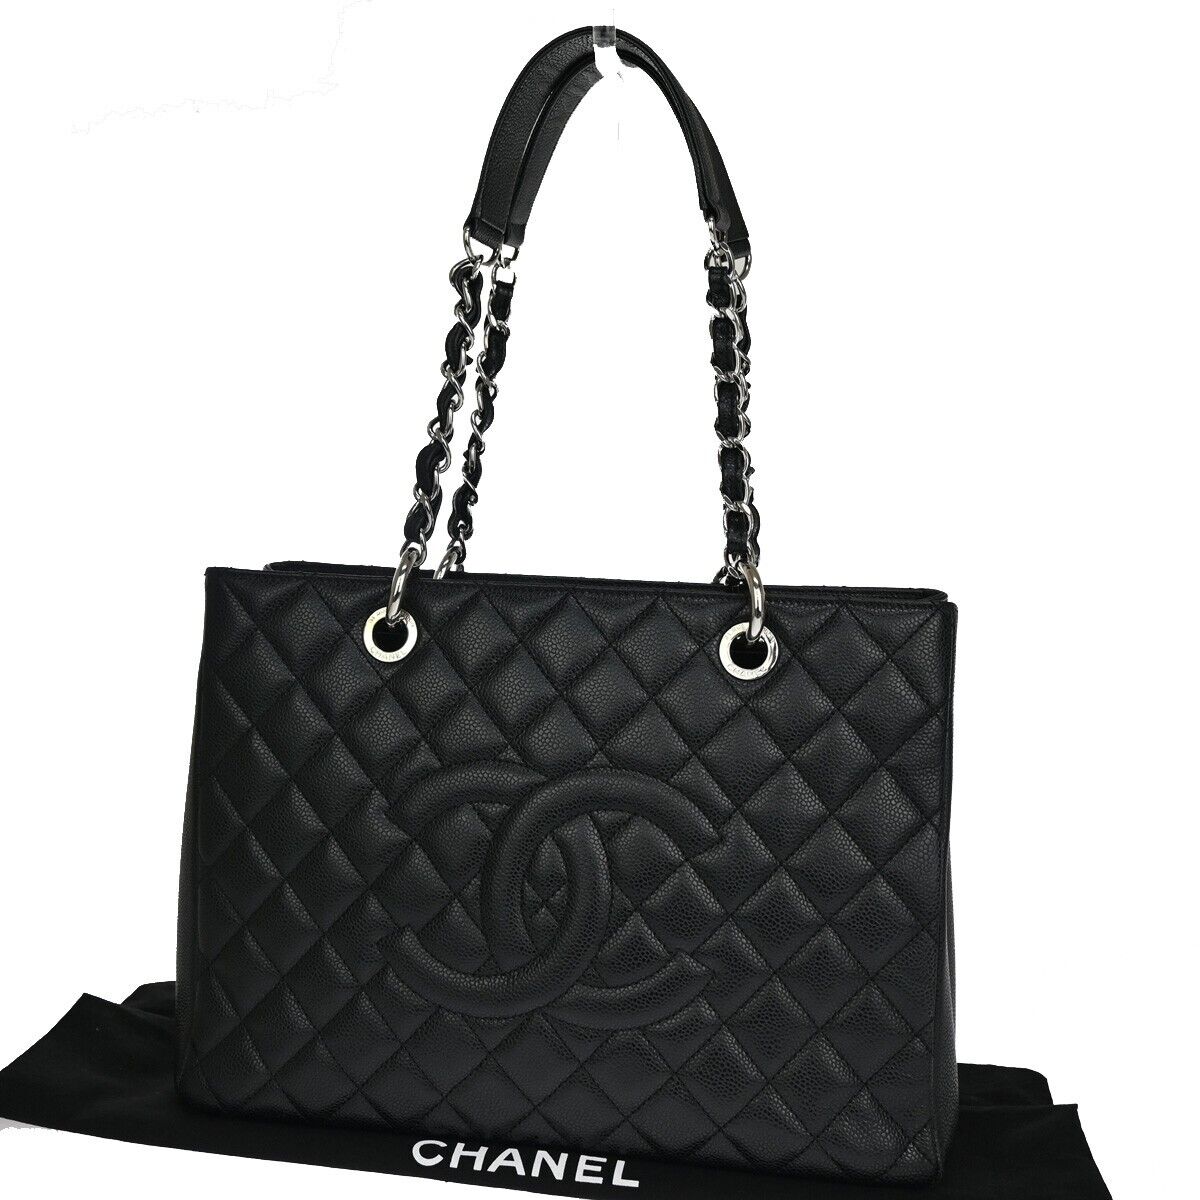 Chanel Grand Shopping Black Leather Tote Bag (Pre-Owned)